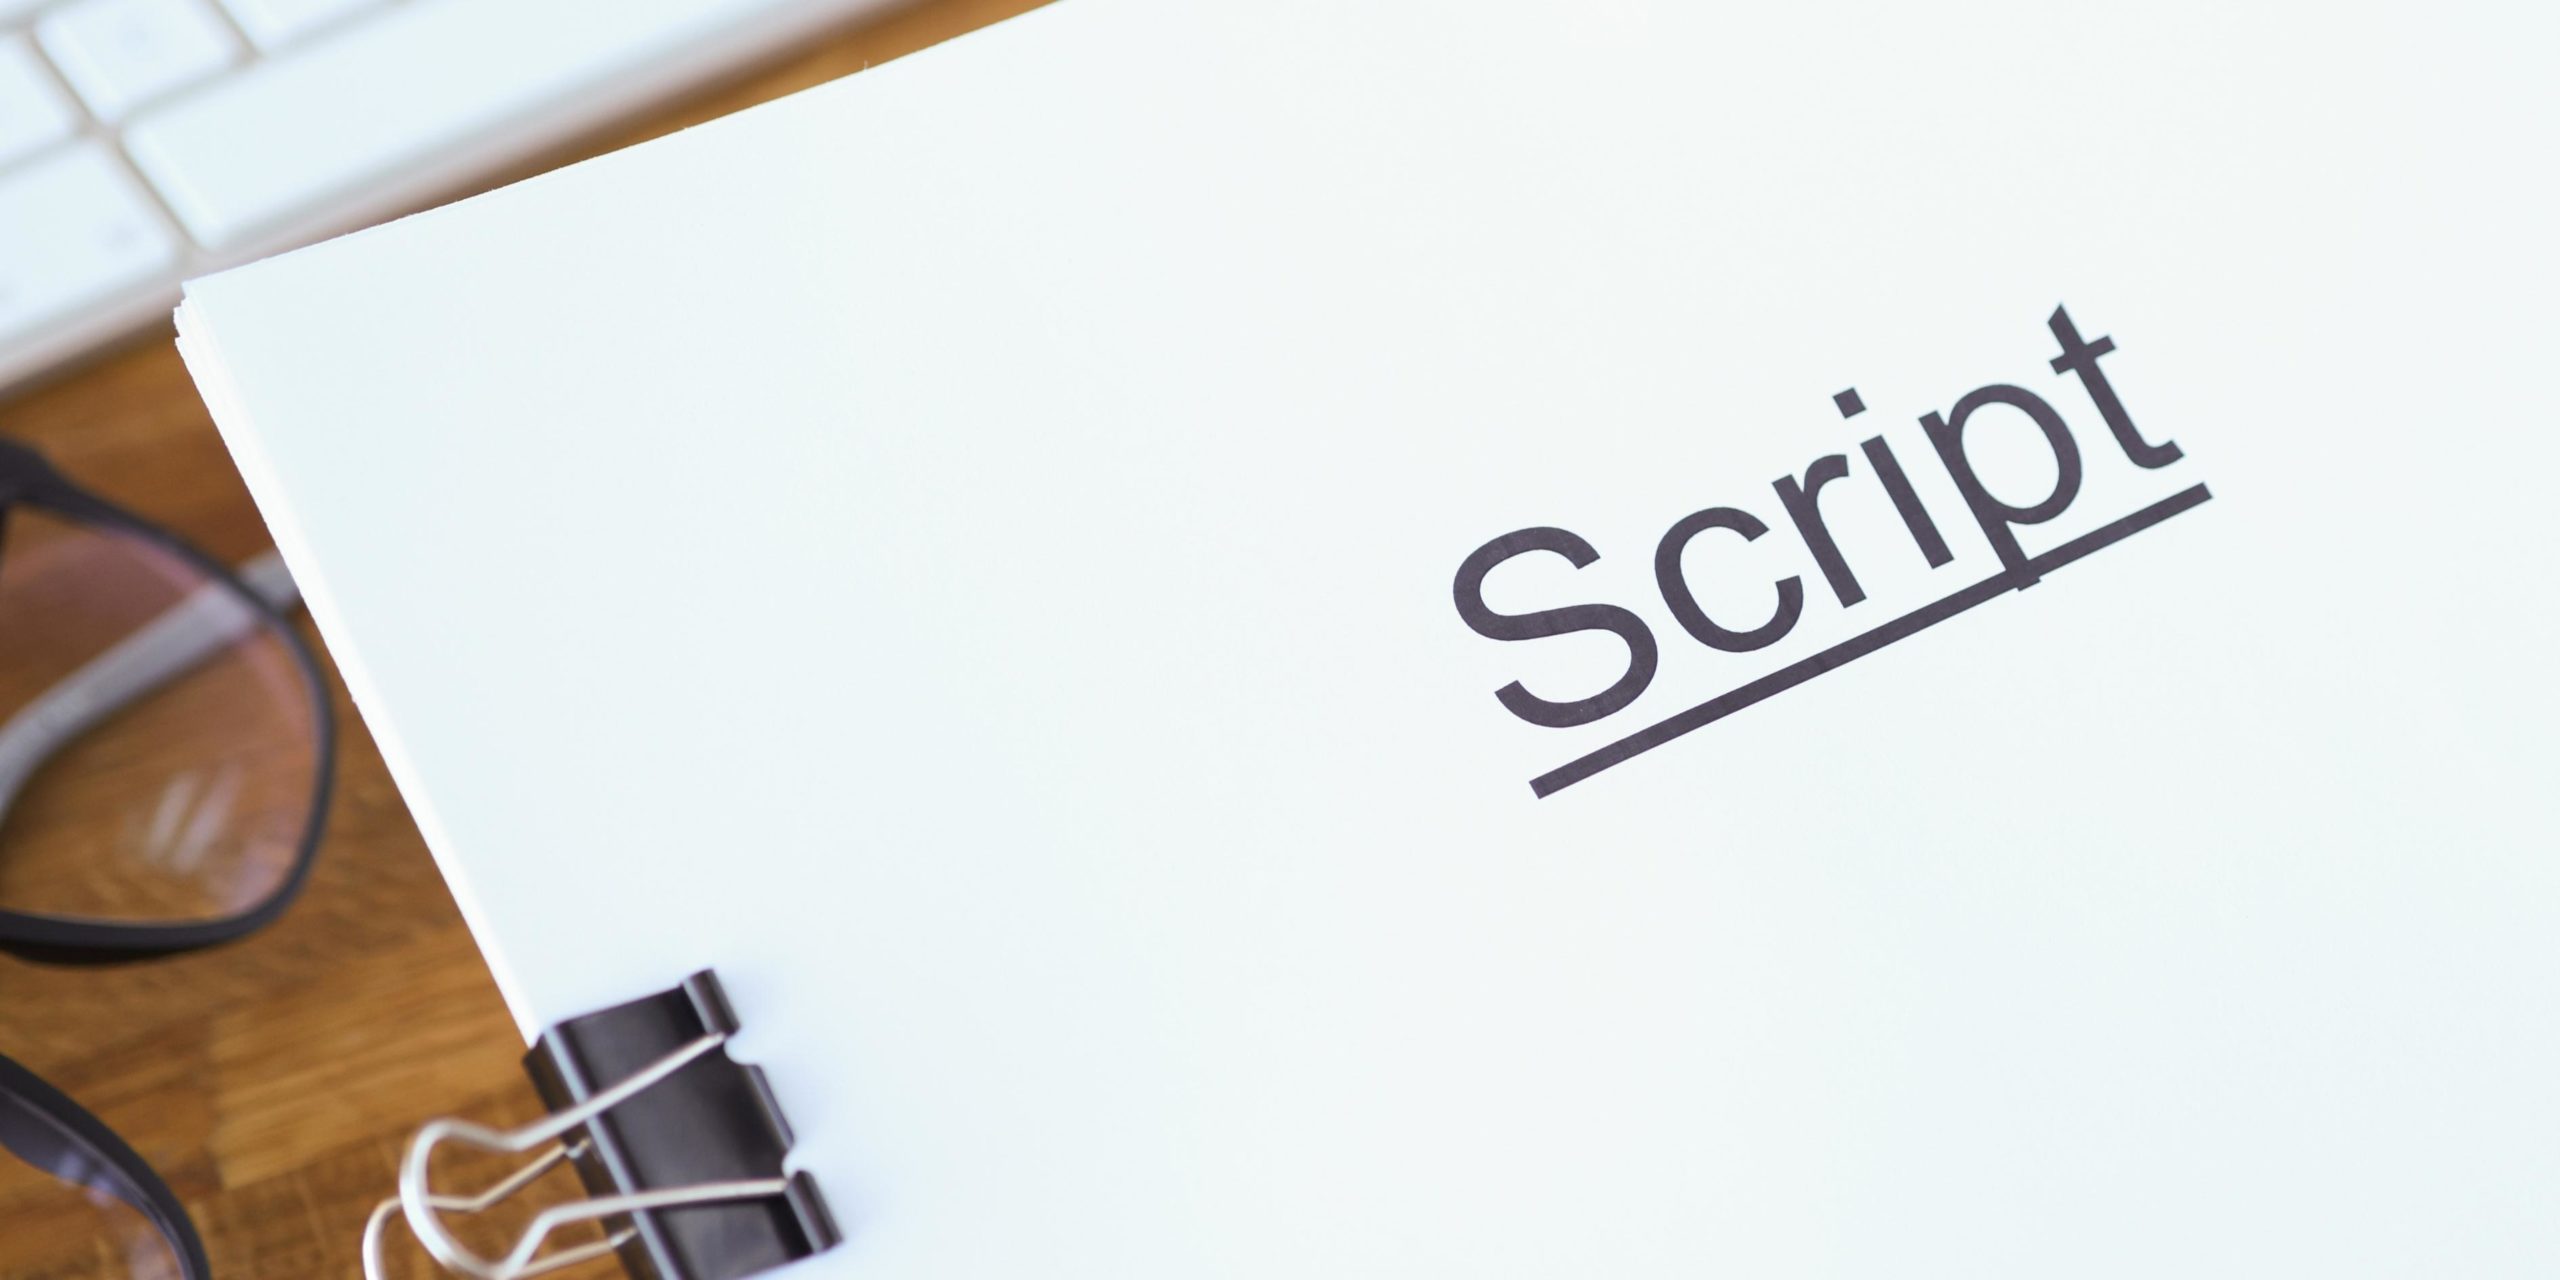 Practice Scripts for Actors | Copyright free scripts for performance